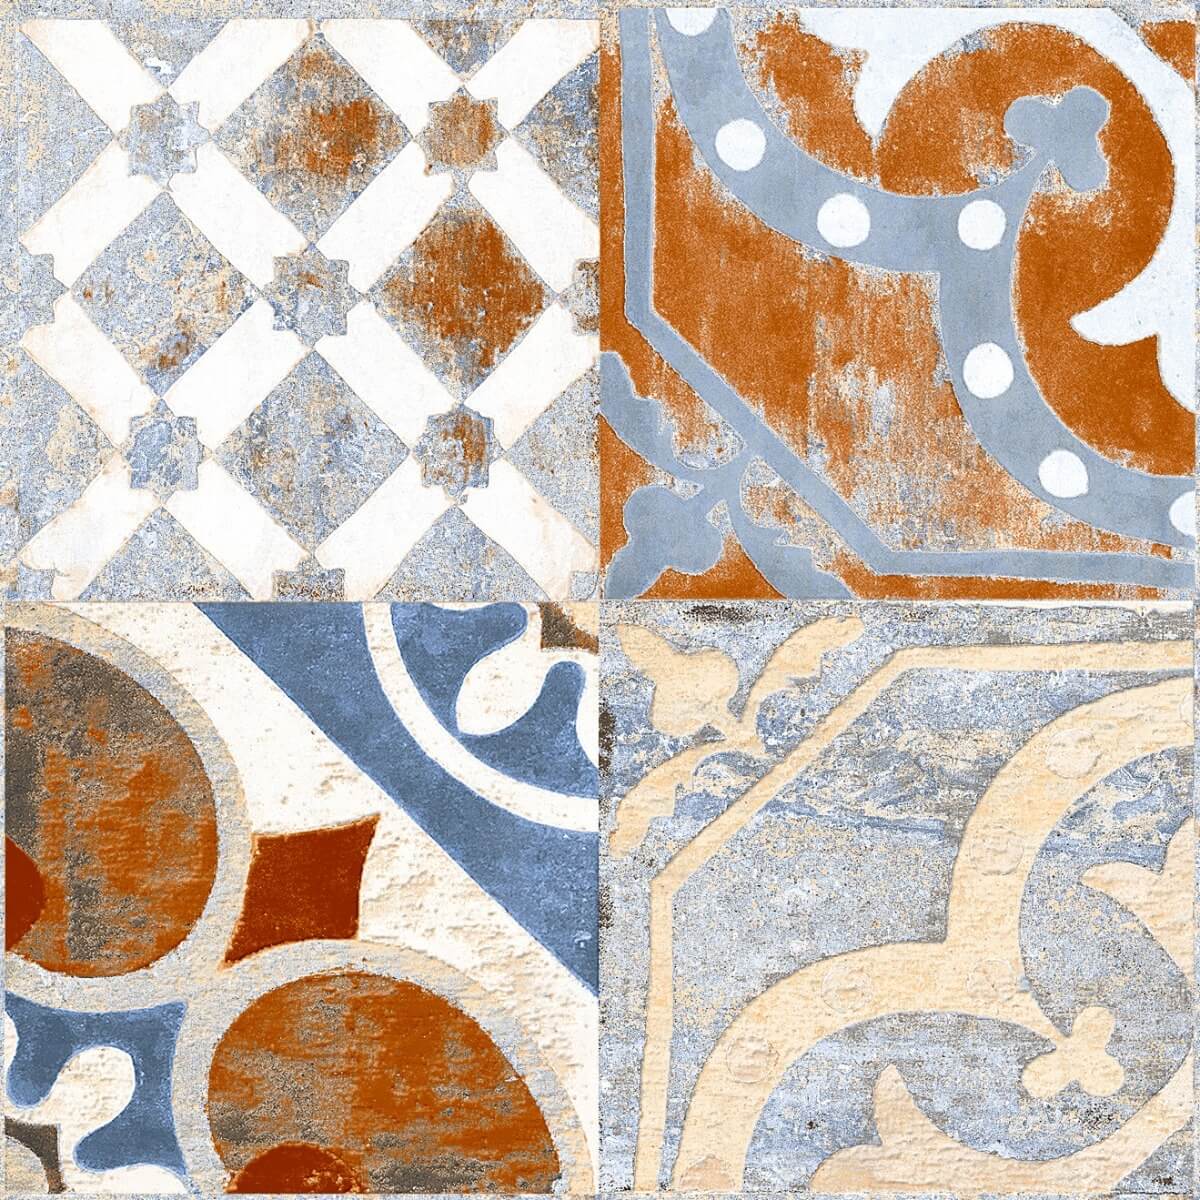 Wall Tiles for Accent Tiles, Dining Room Tiles, Hospital Tiles, Bar/Restaurant, Outdoor Area